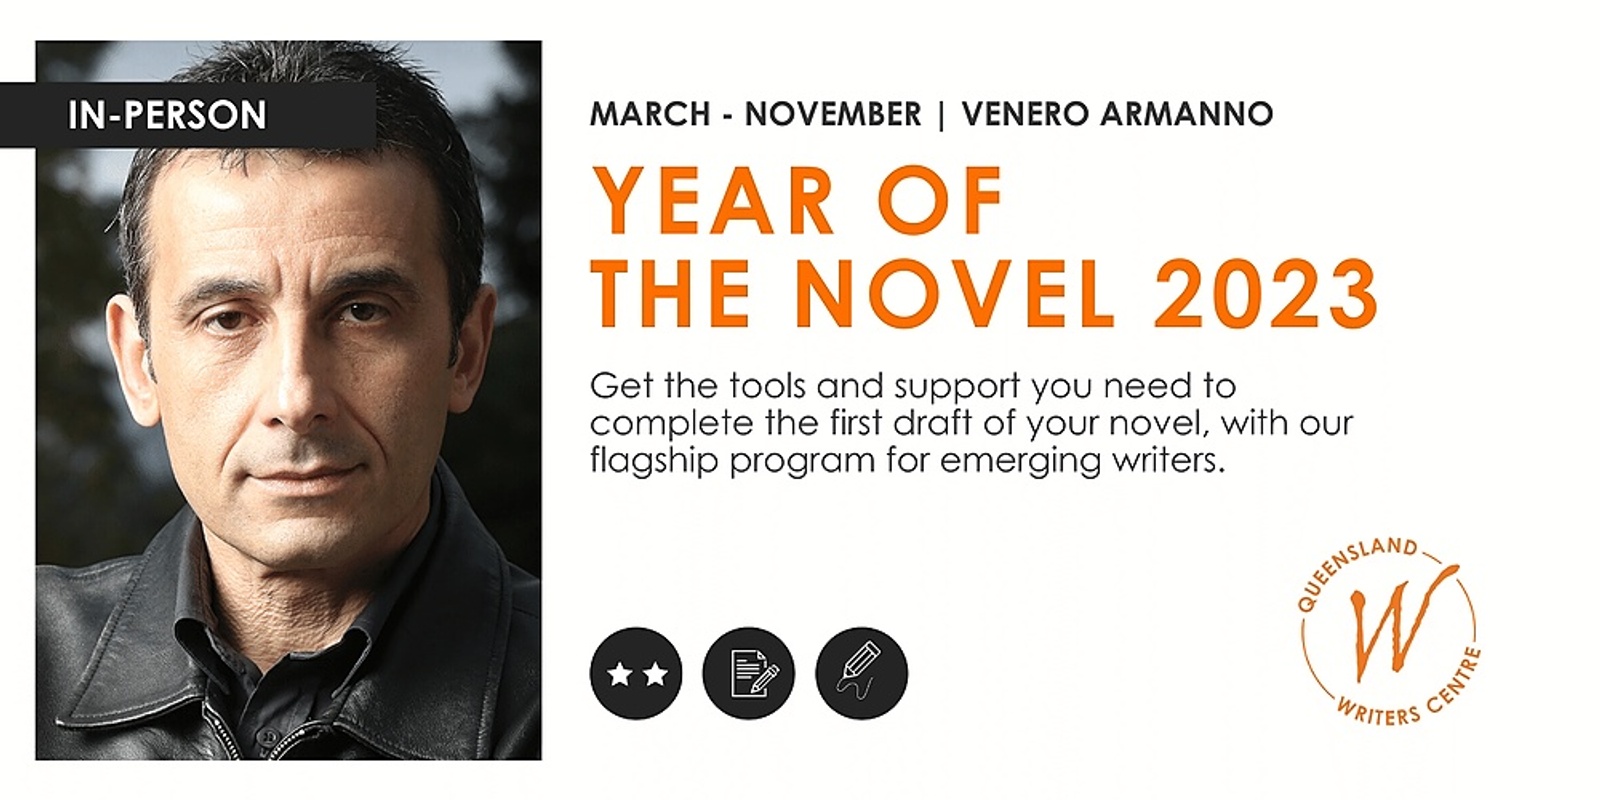 Year Of The Novel 2023 with Venero Armanno